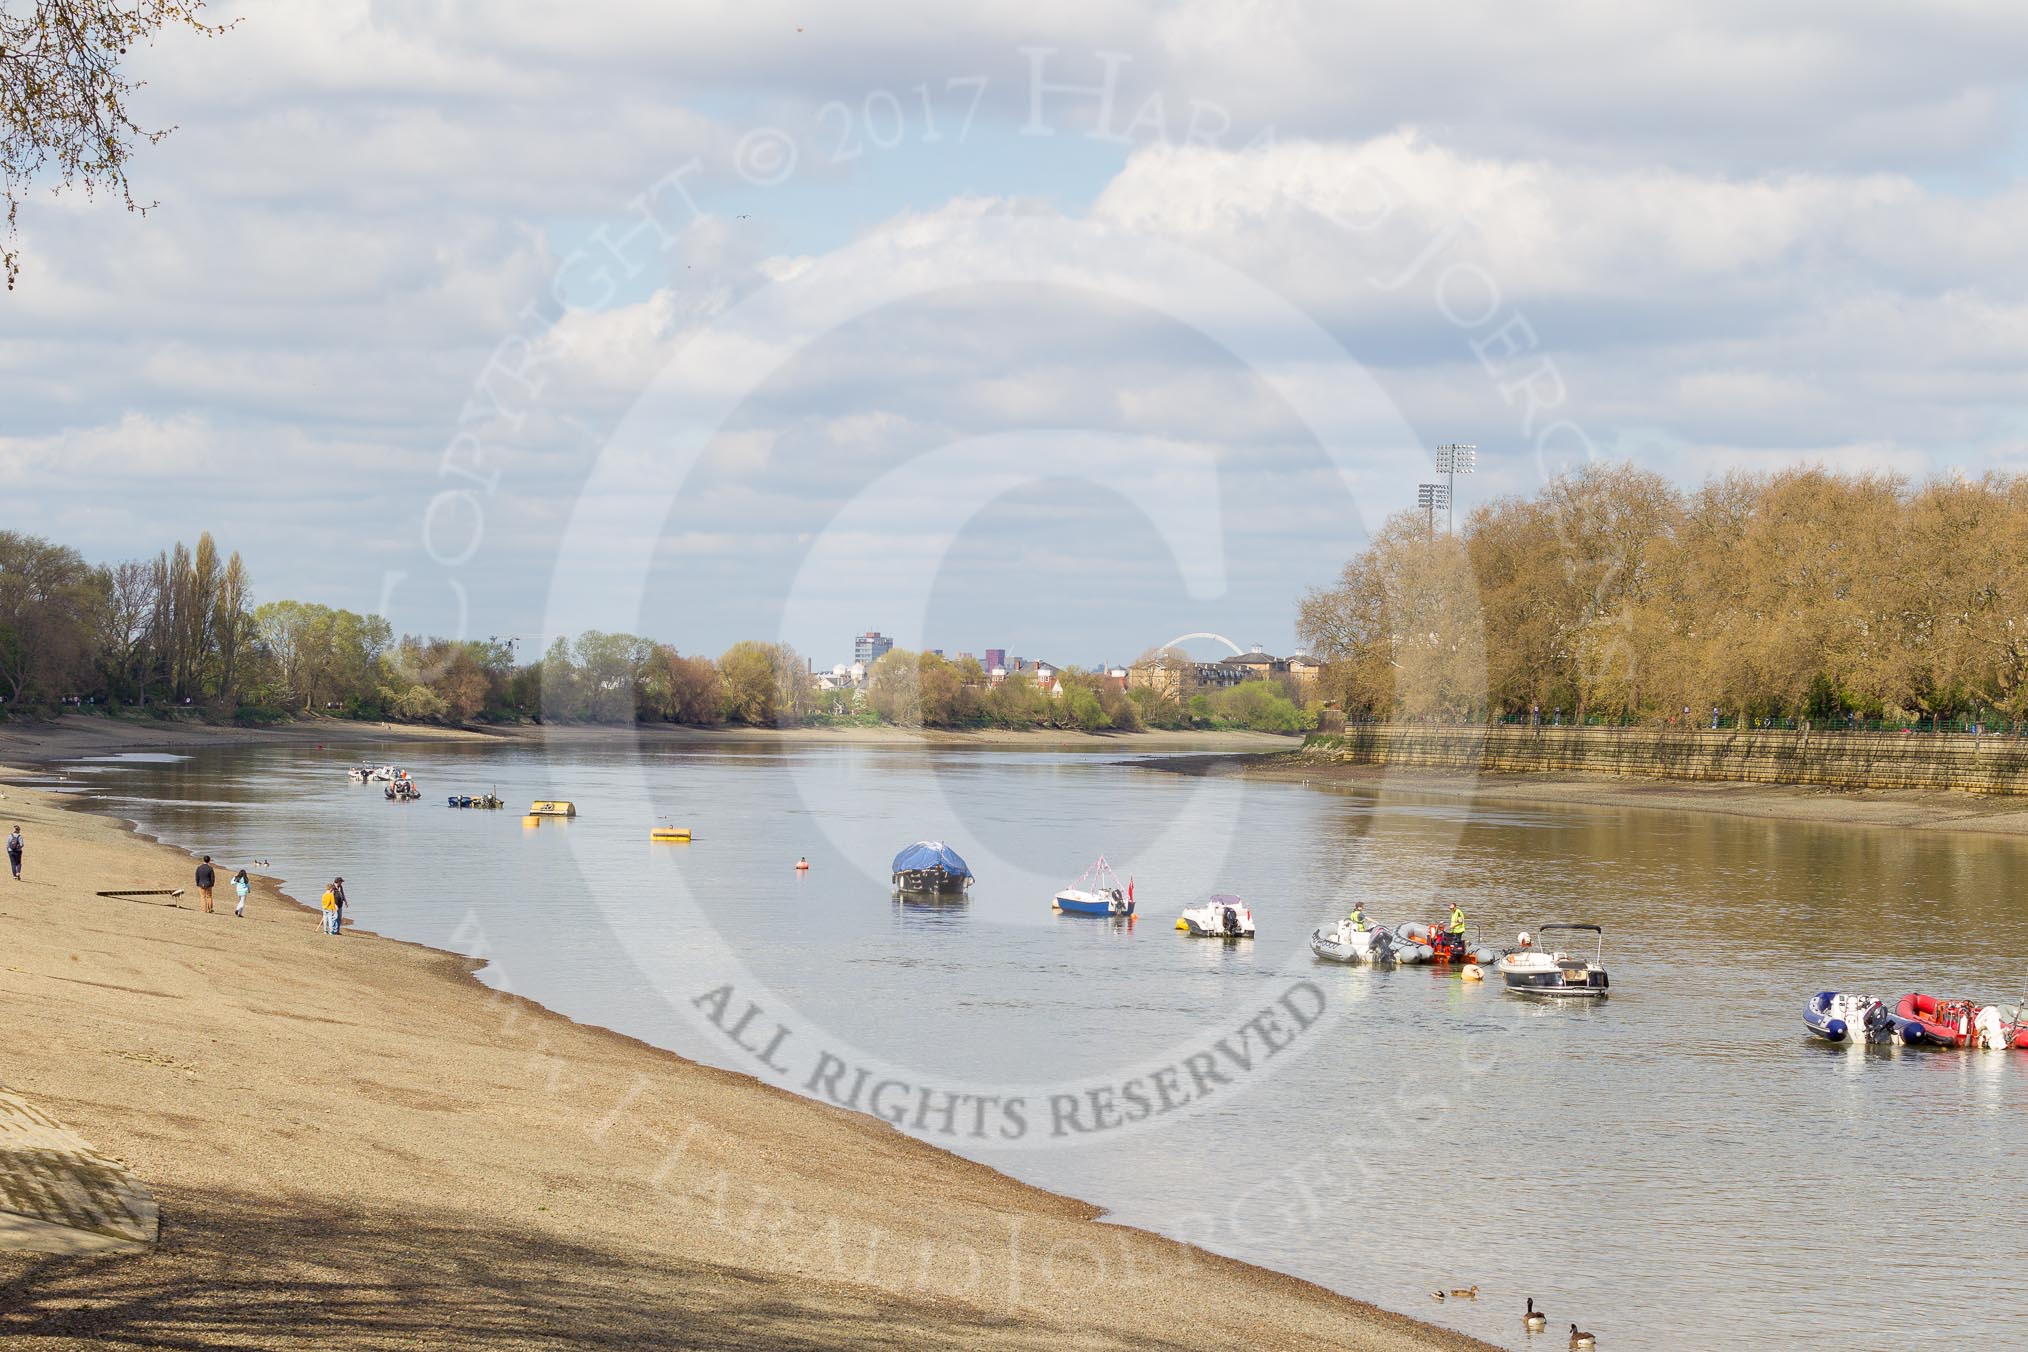 The Boat Race season 2017 -  The Cancer Research Women's Boat Race: The River Thames at Putney on the day of the Boat Race - calm and sunny weather conditions.
River Thames between Putney Bridge and Mortlake,
London SW15,

United Kingdom,
on 02 April 2017 at 13:18, image #1